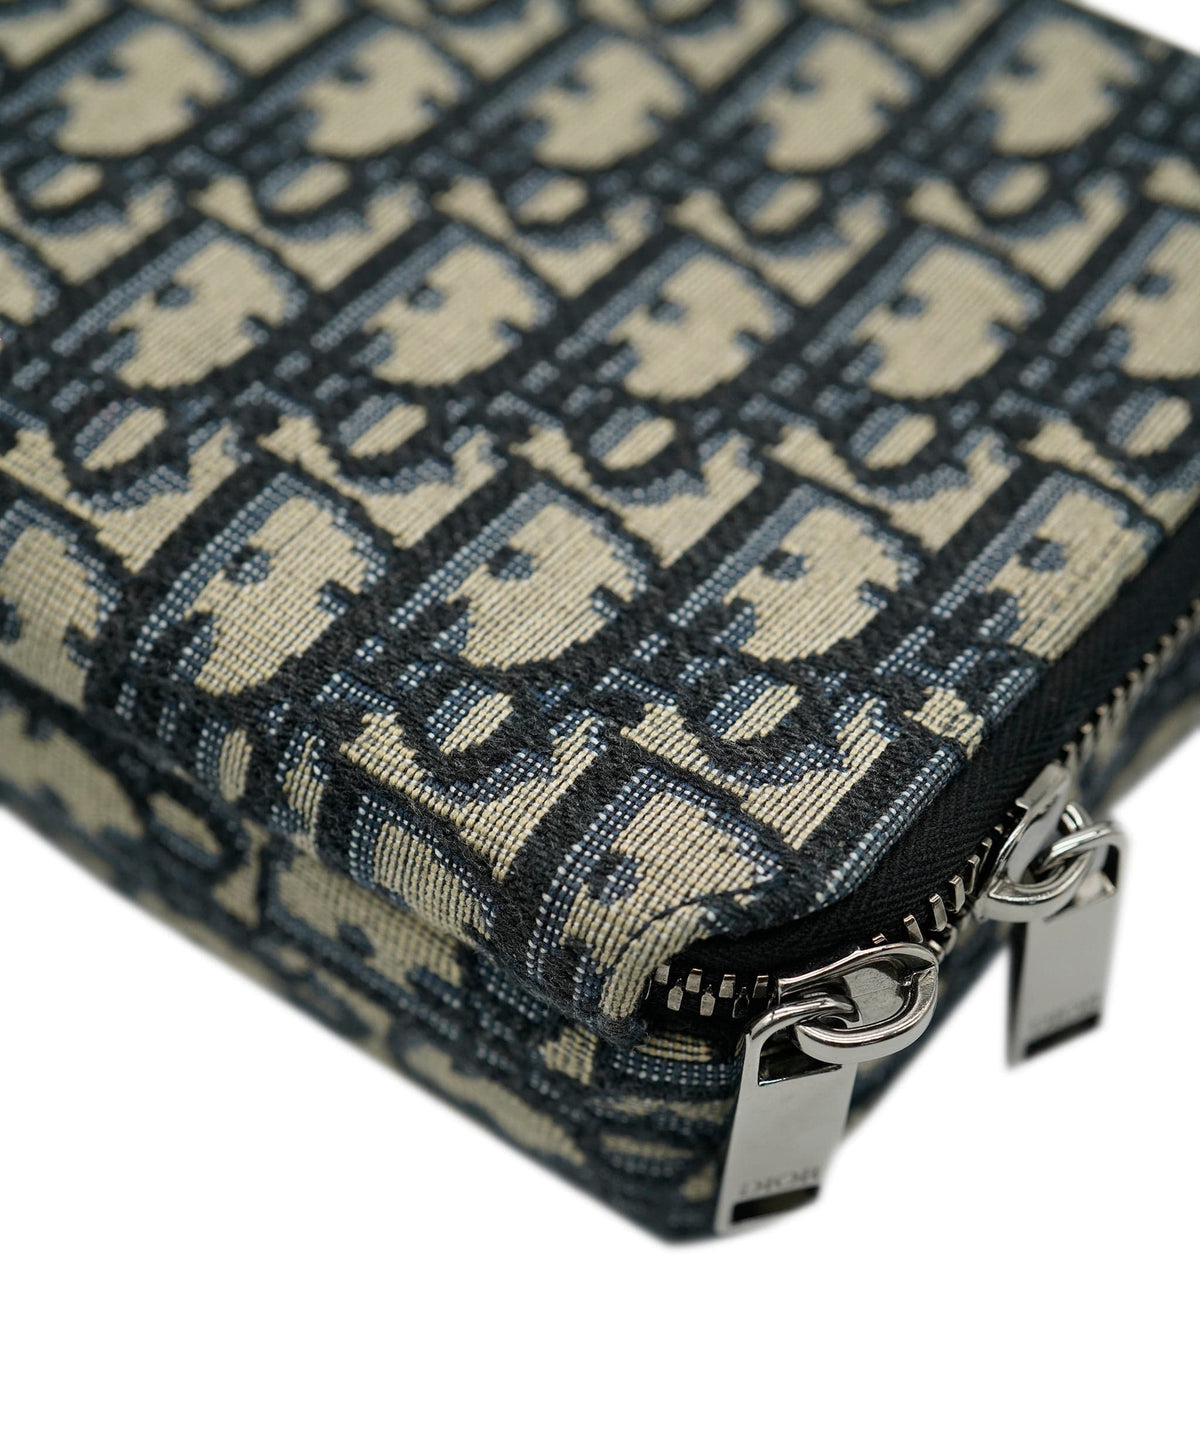 Pouch with Strap Beige and Black Dior Oblique Jacquard